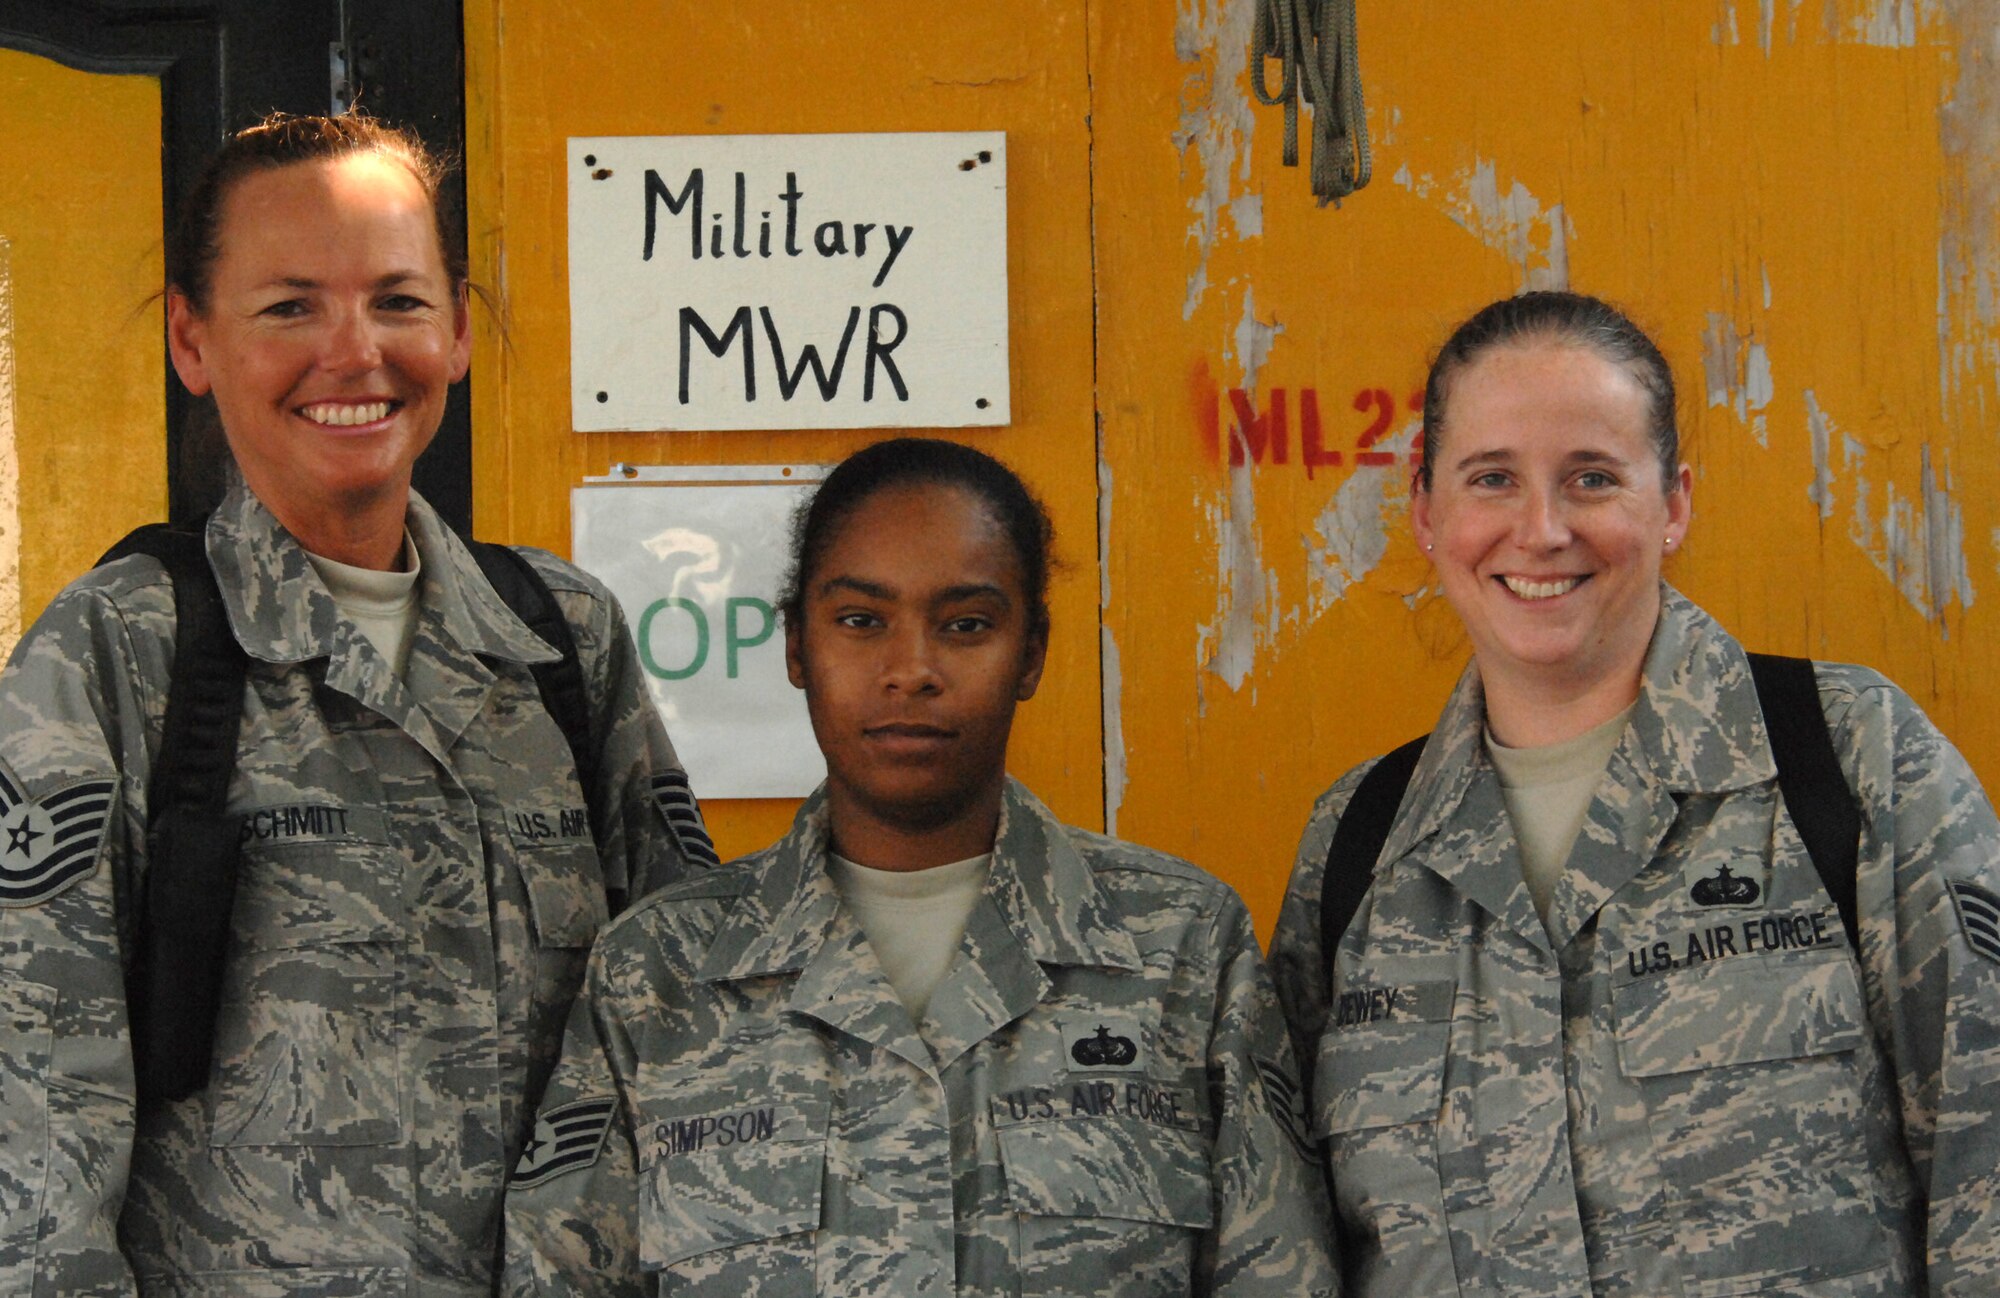 LAGHMAN PROVINCE, Afghanistan – Tech. Sgt. Diane Schmitt, Staff Sgt. Beverly Simpson and Staff Sgt. Laura Dewey (from left to right), Laghman PRT MWR, stand outside the morale, welfare and recreation building here.  The three Airmen have continuously worked on improving both the building and the events and activities. (U.S. Air Force photo br Master Sgt. James Law)